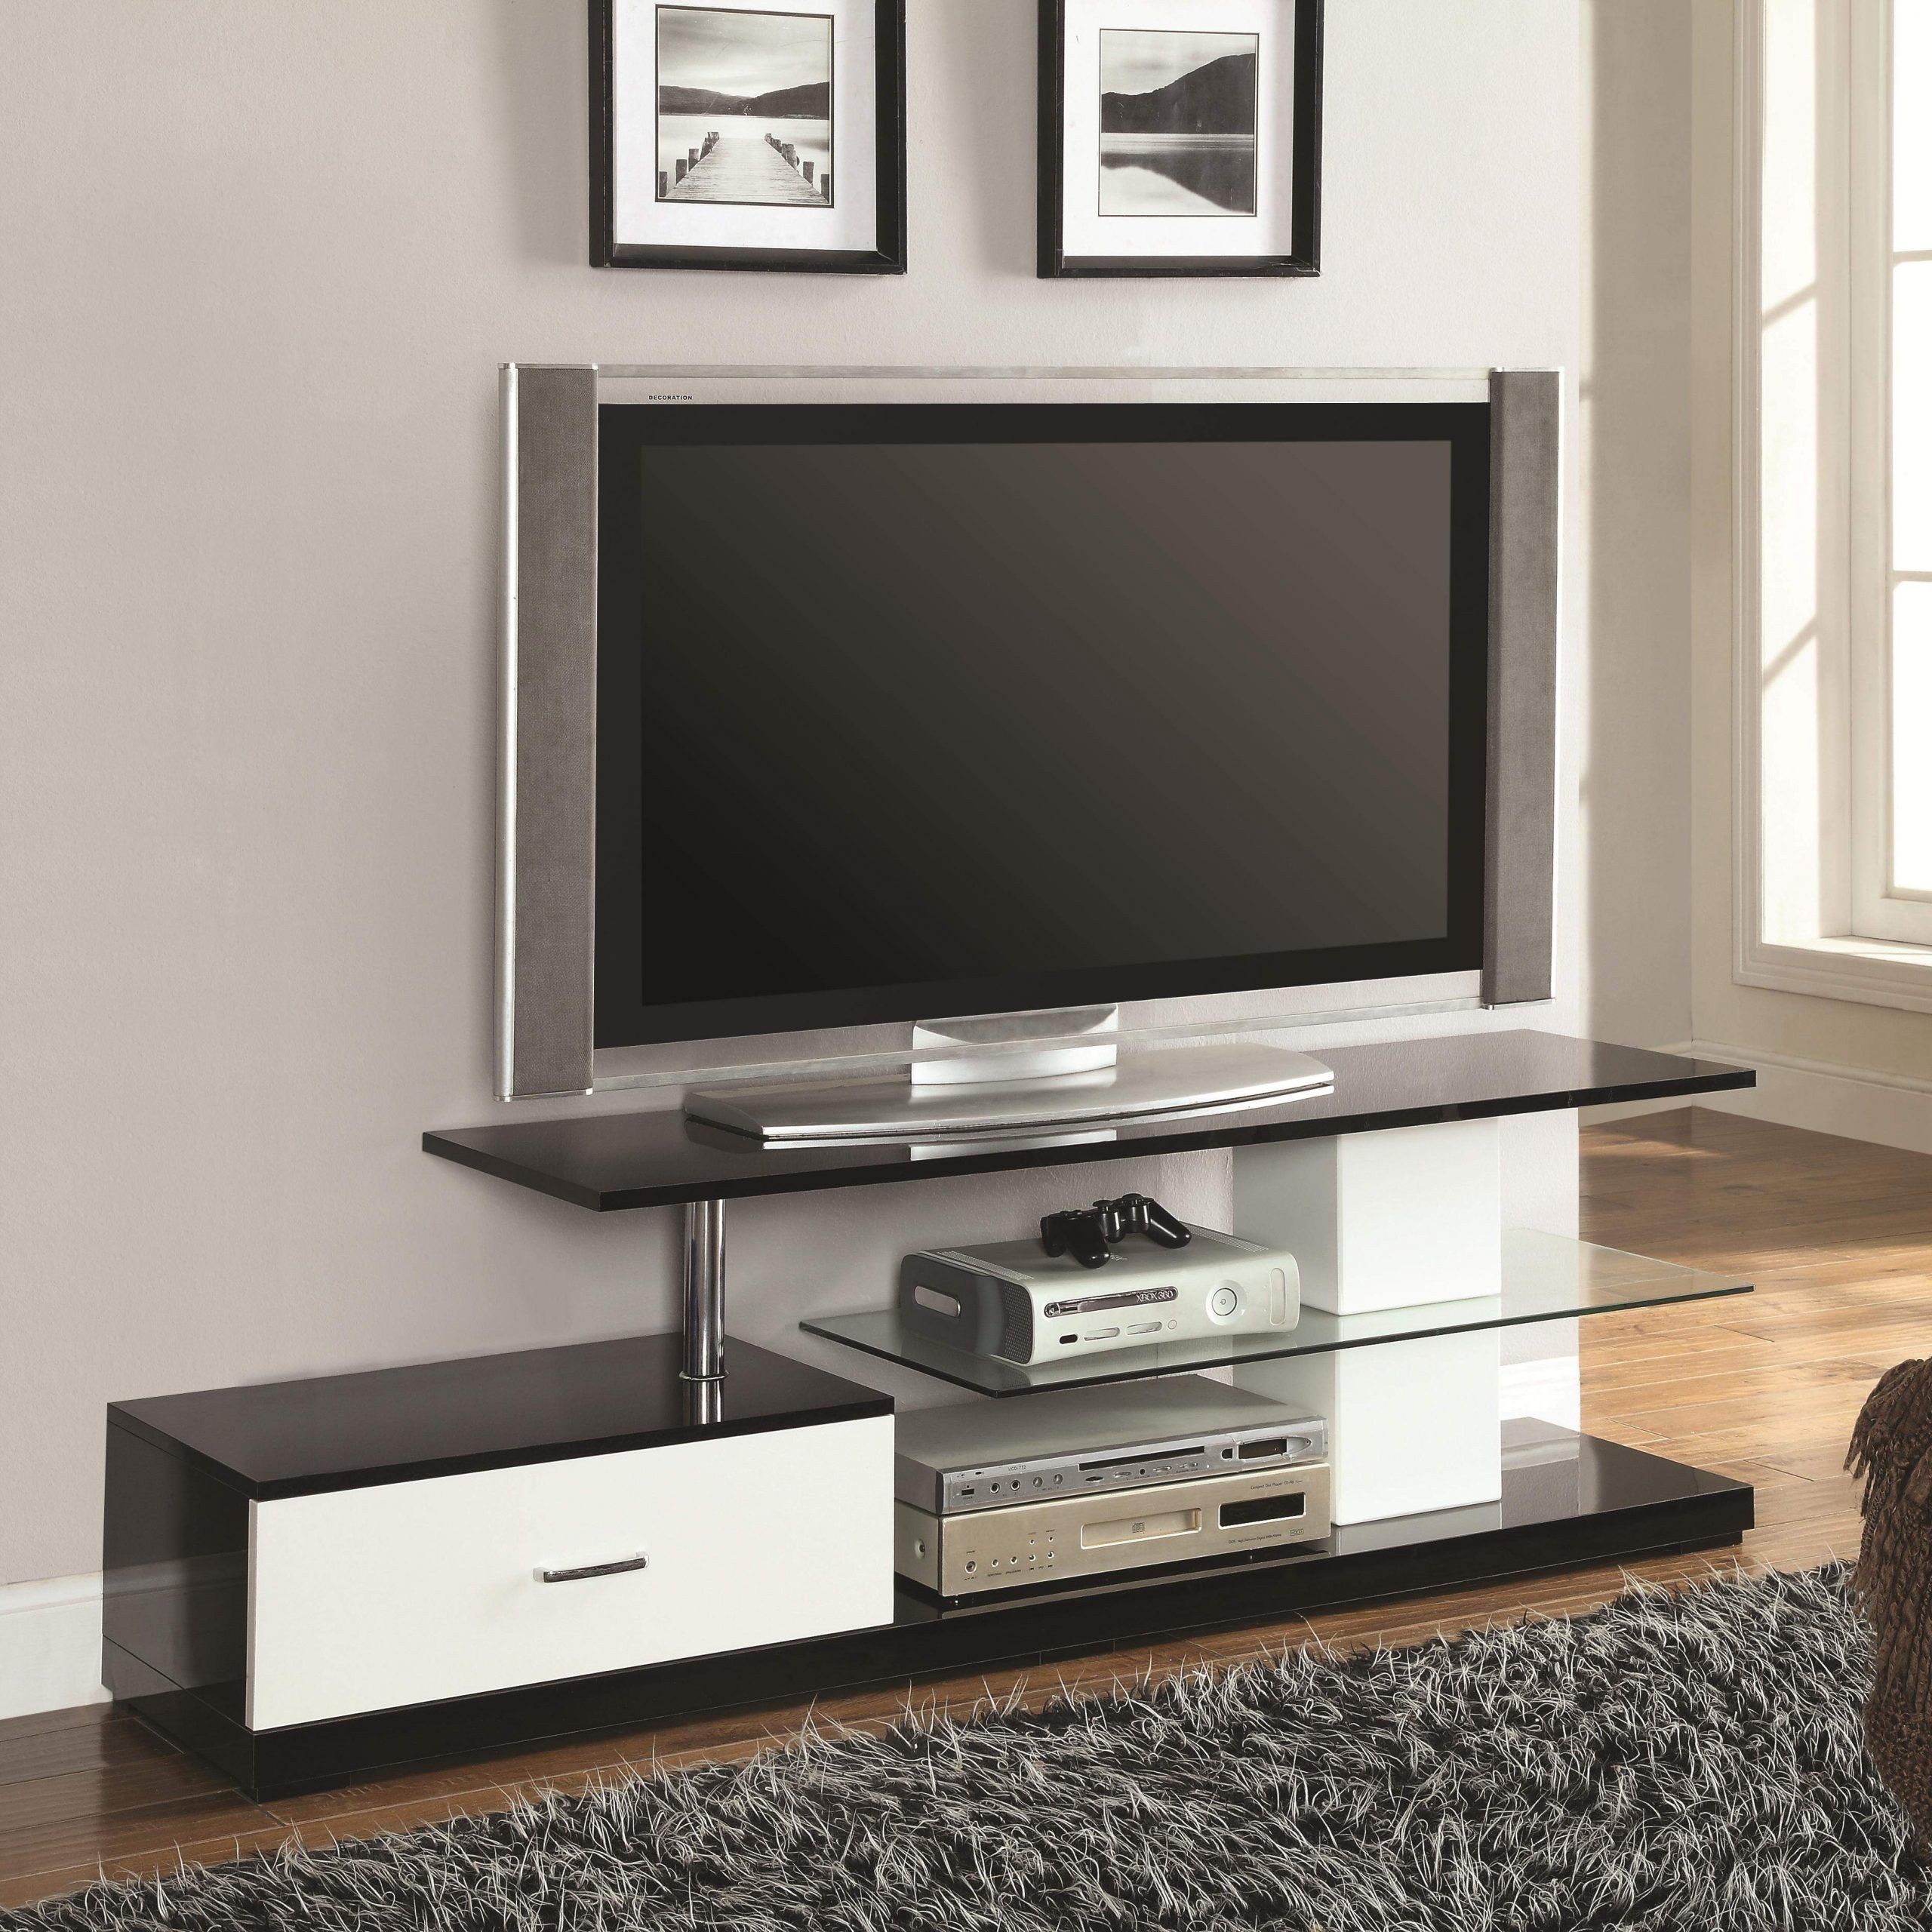 Tv Stands Black, Silver And White Tv Stand With Drawer And Throughout Black Tv Stands With Drawers (View 3 of 15)